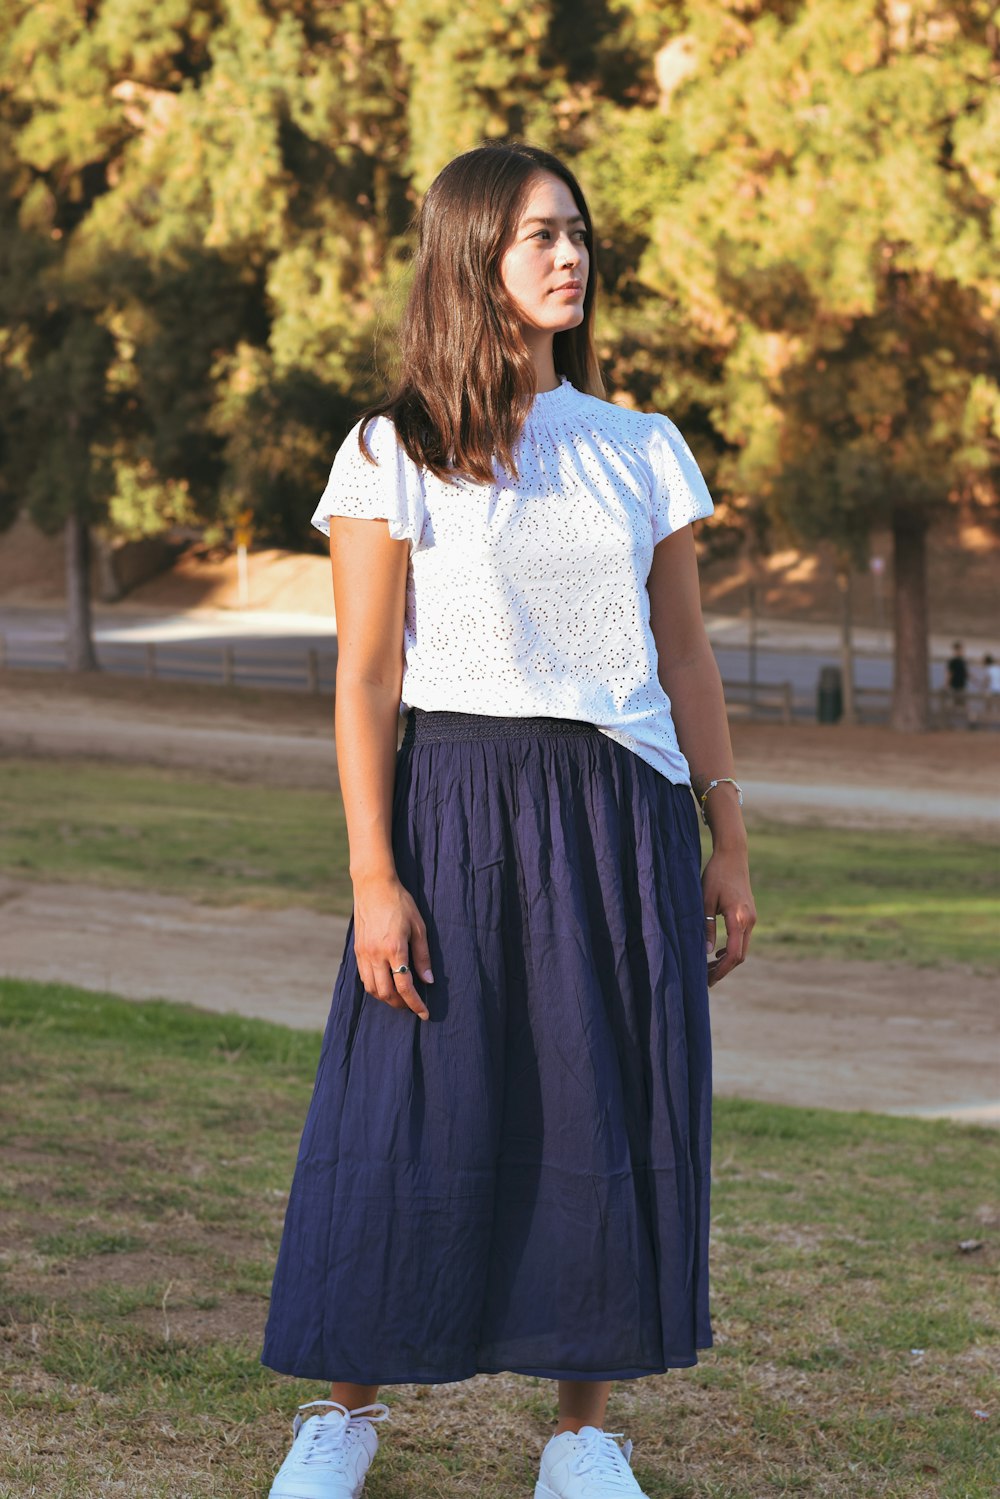 a woman standing in the grass wearing a skirt